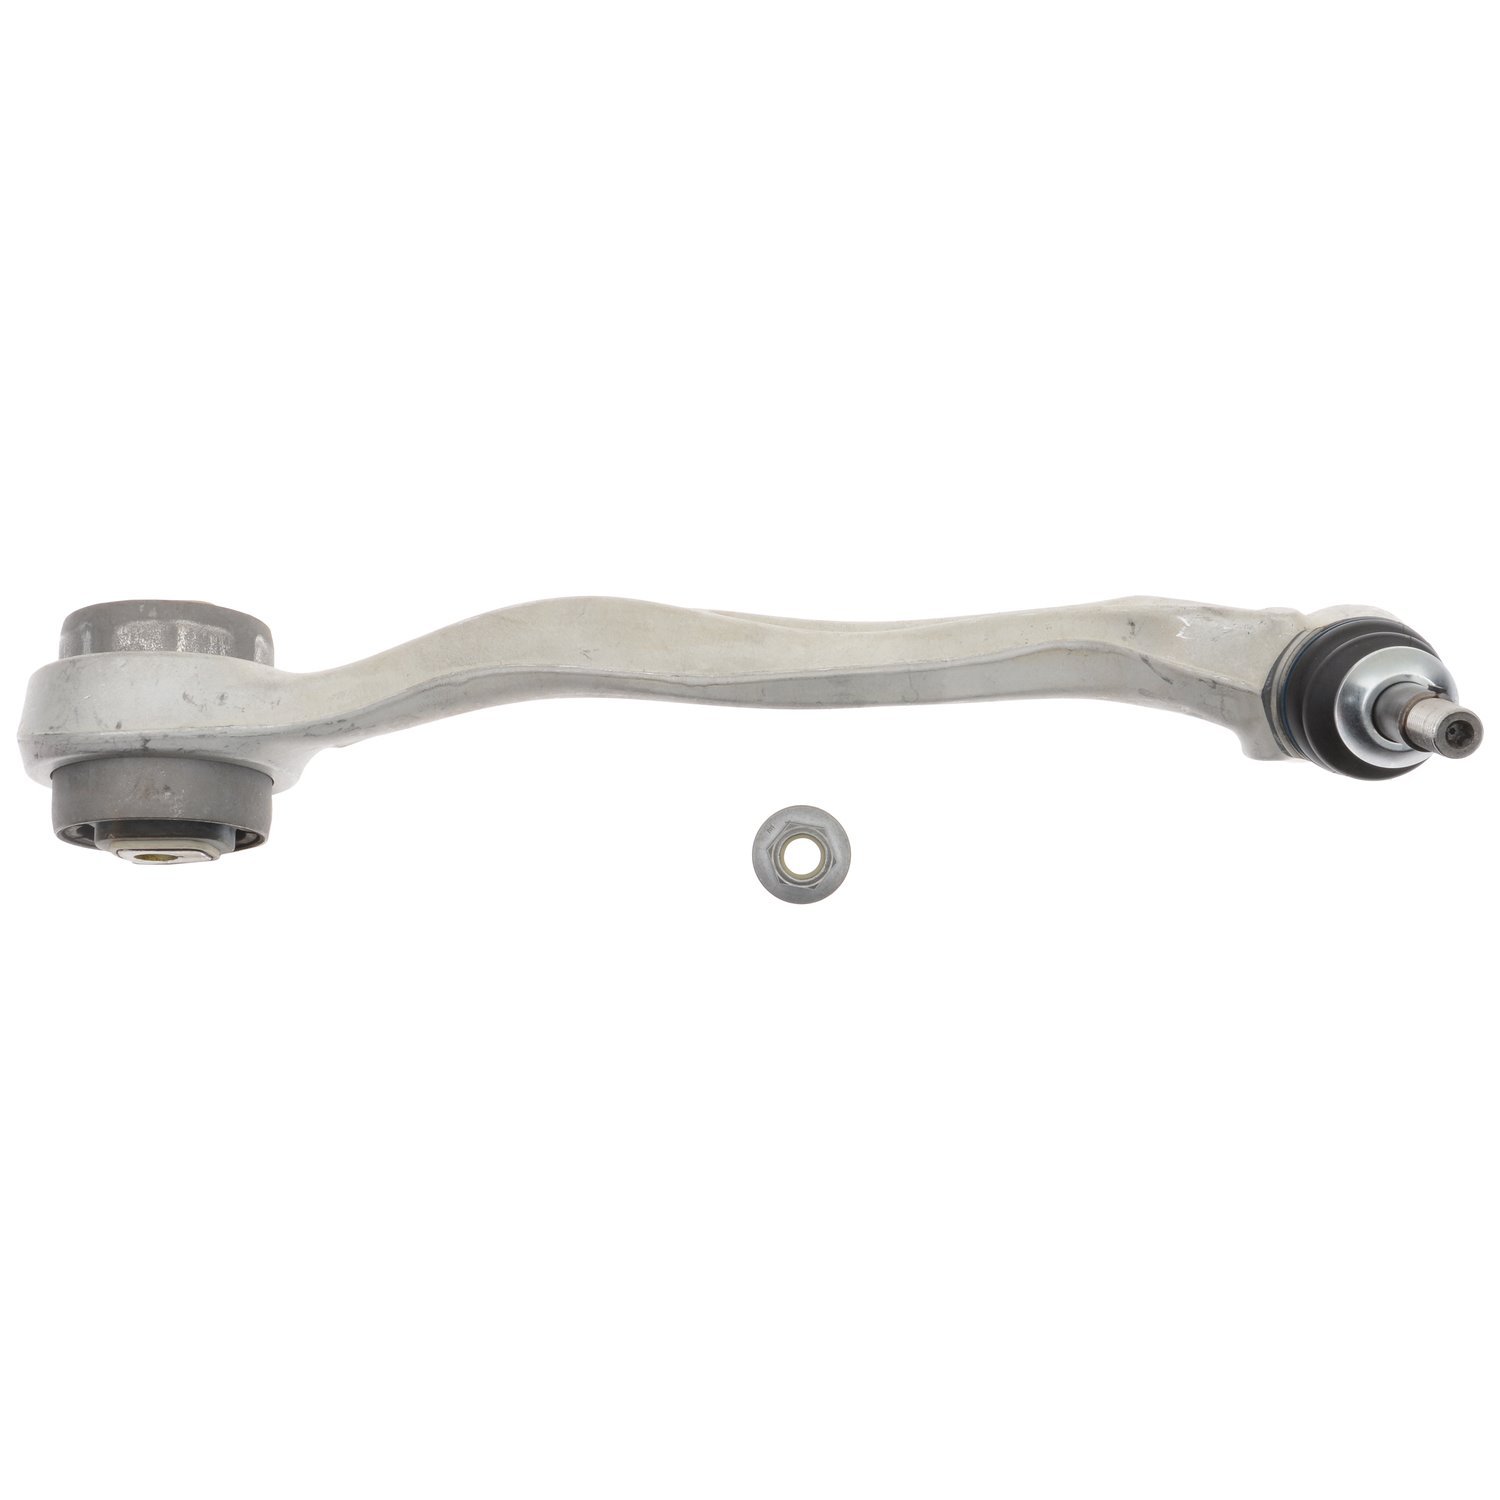 JTC2209 Control Arm Assembly Fits Select BMW Models, Front Right Lower Forward